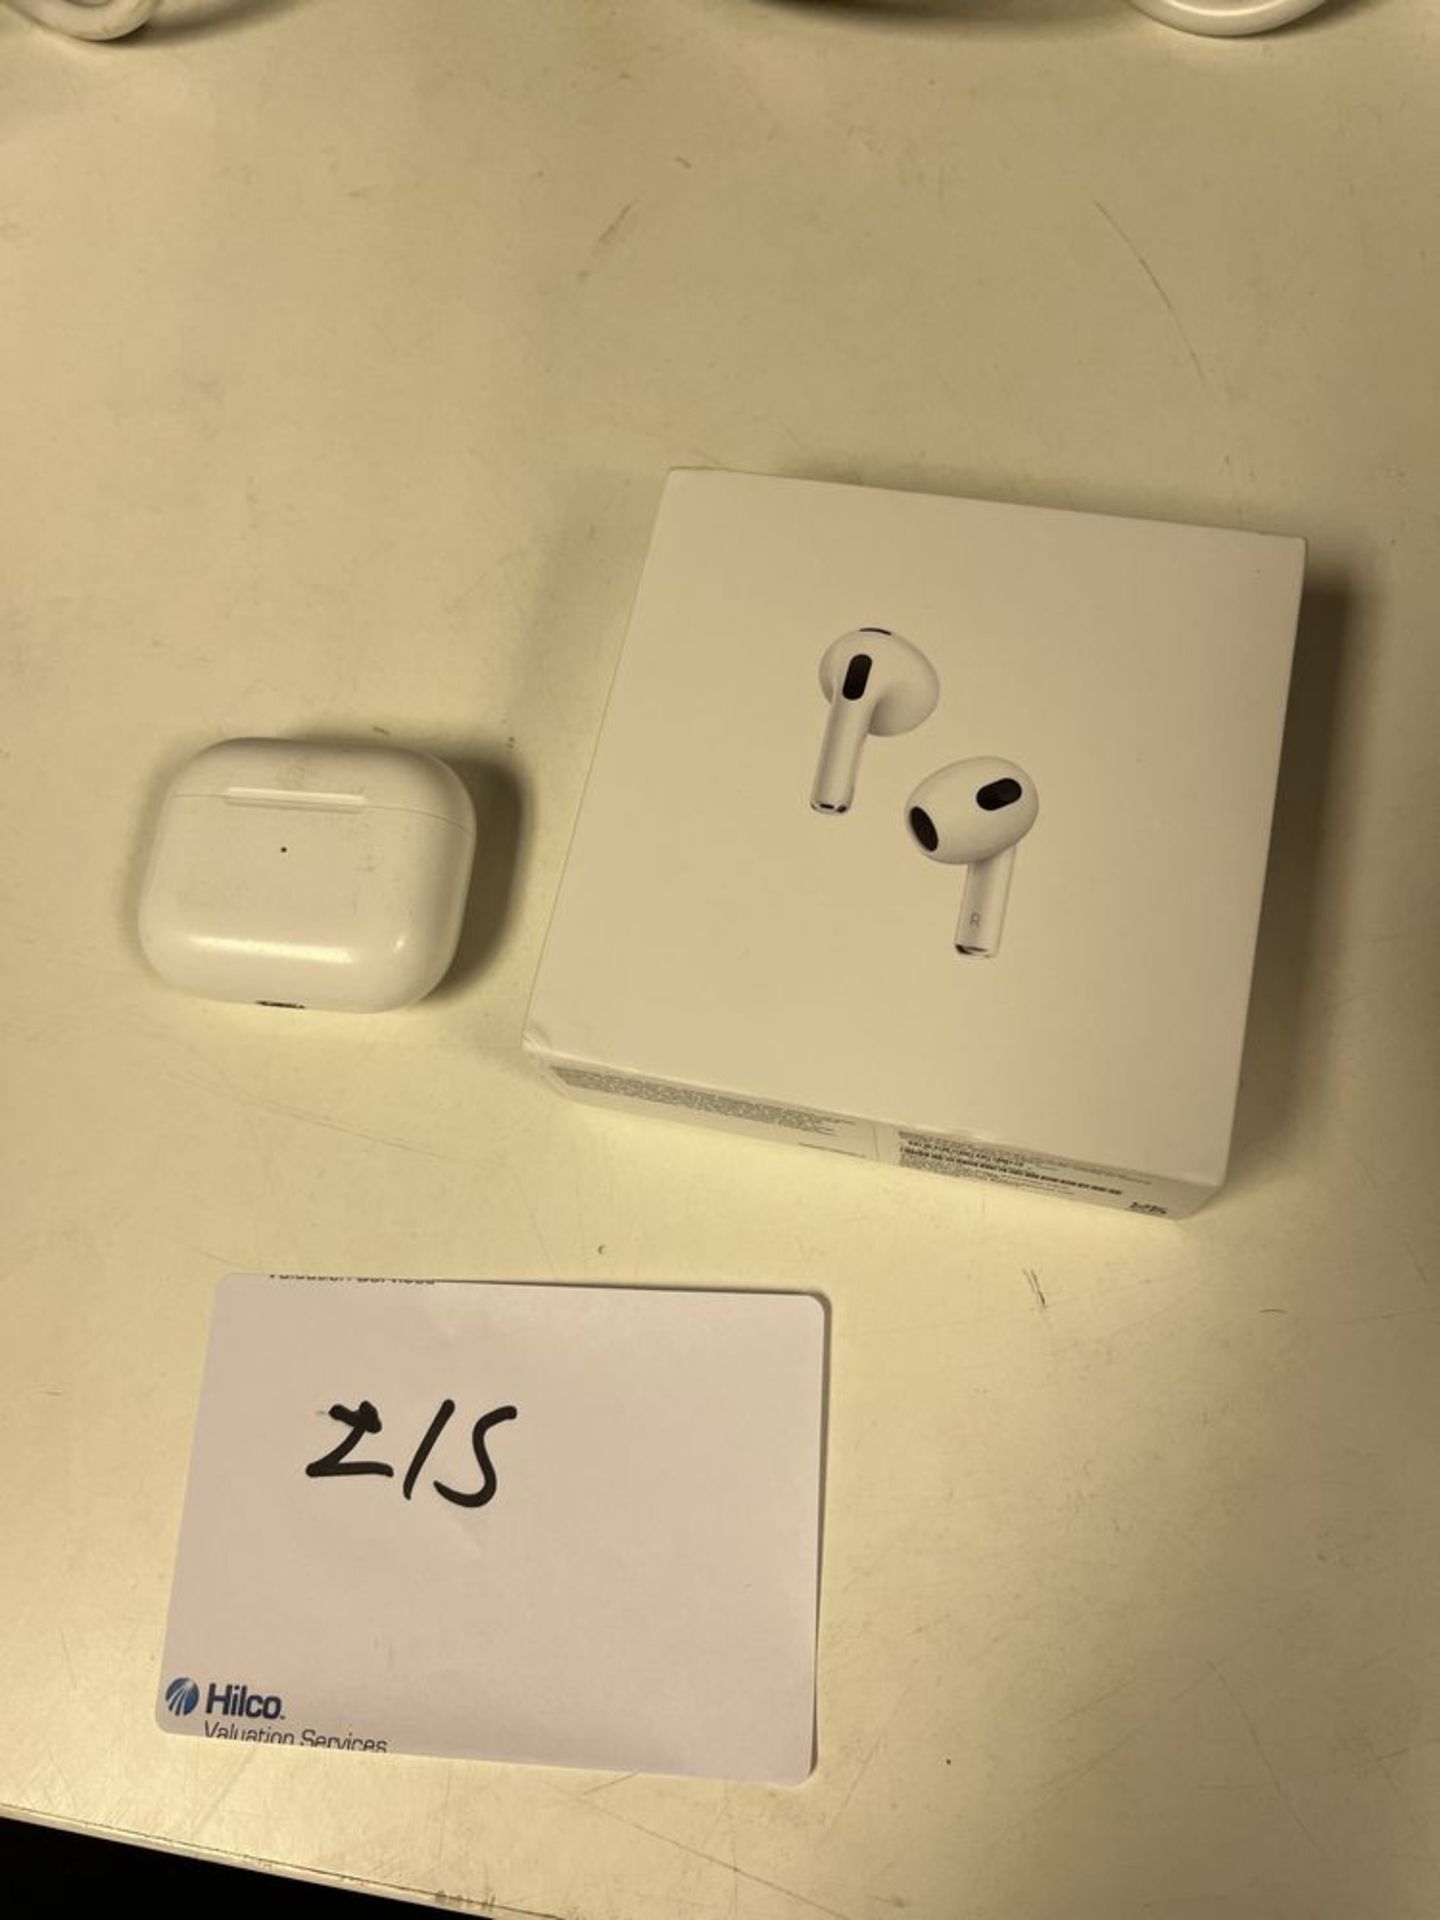 Apple AirPod with MagSafe Charging Case With box. Serial No.C4QP27W56X